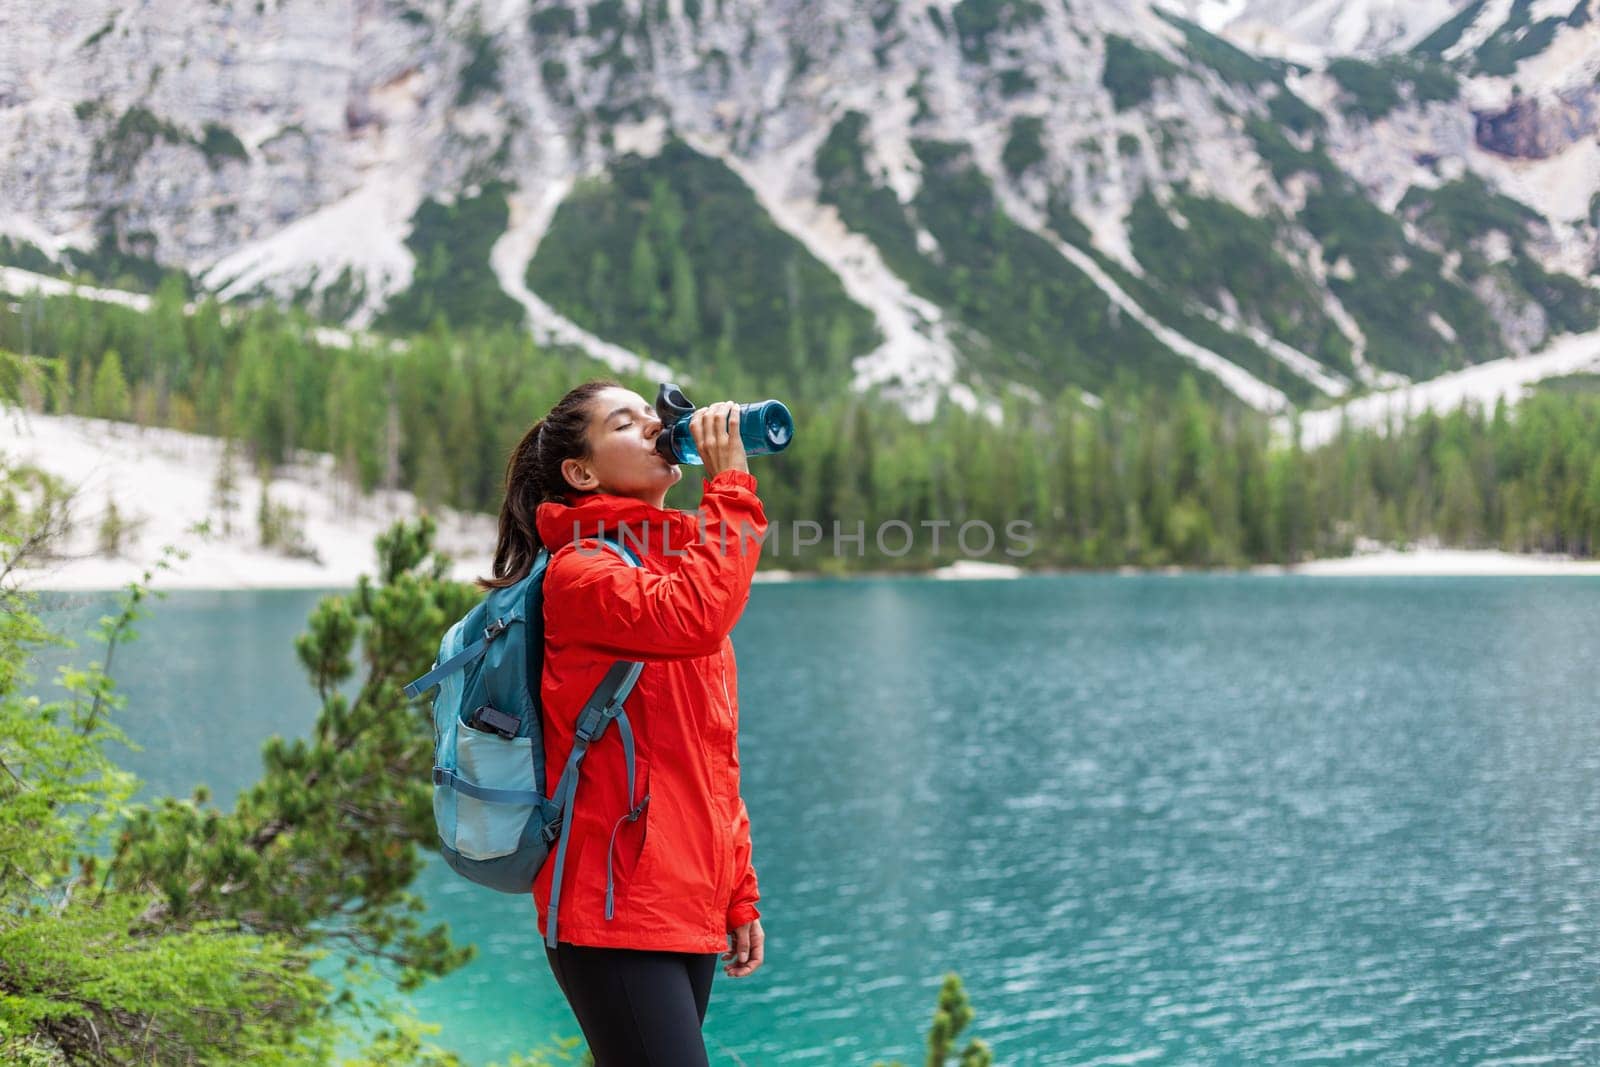 Hydration while on track. Attractive woman hiker in red raincoat drinking water near a lake with mountains in the background.